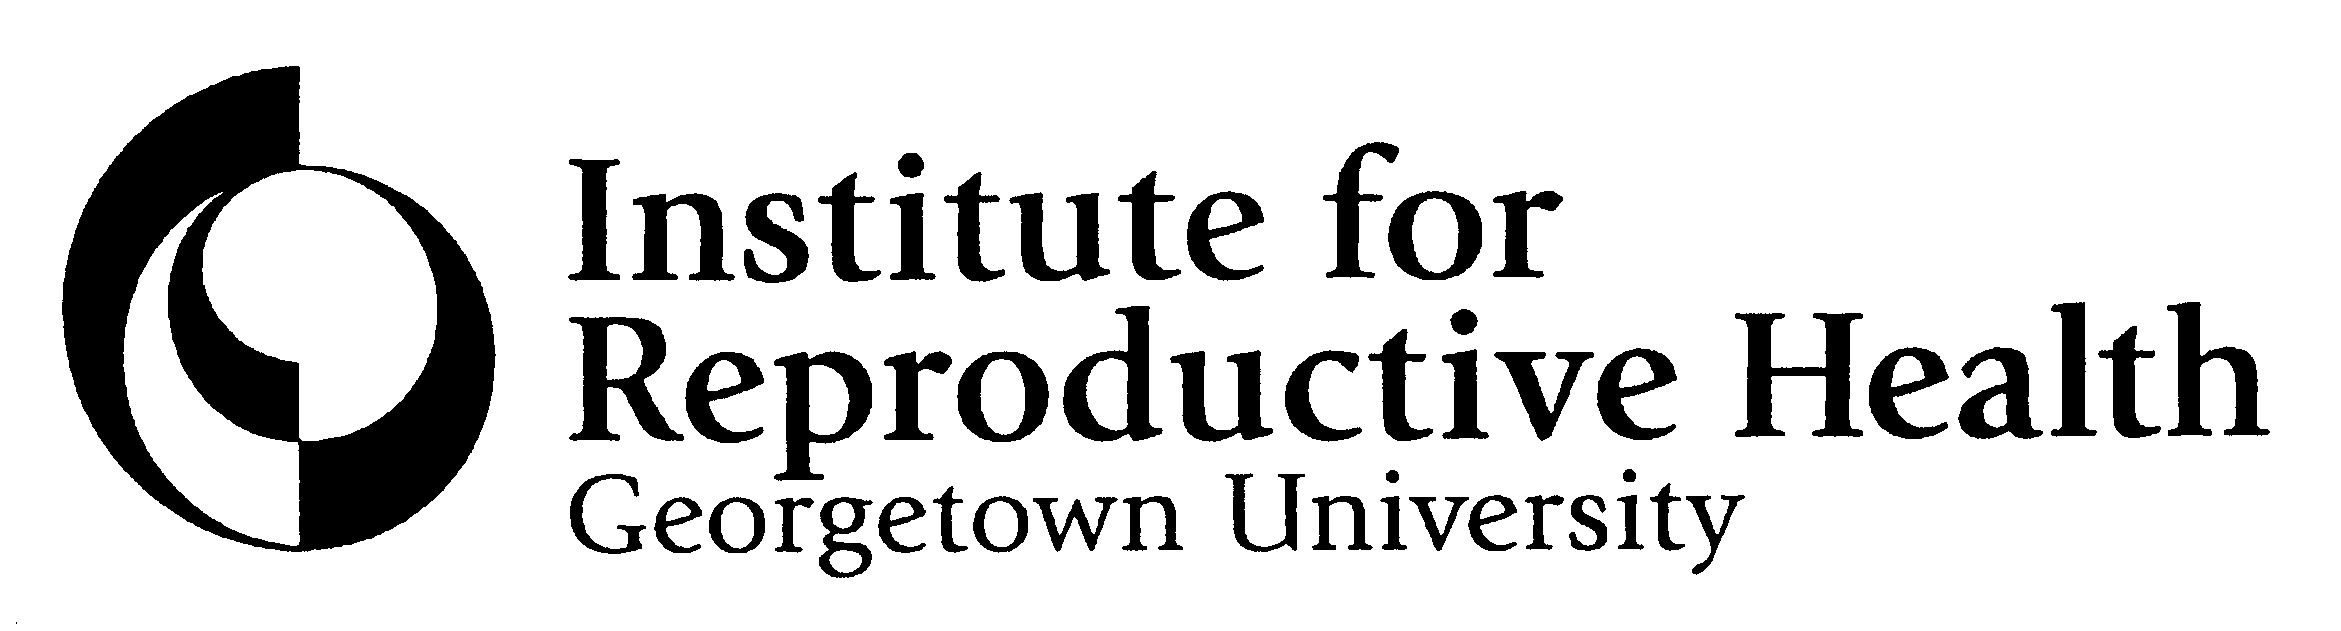 Trademark Logo INSTITUTE FOR REPRODUCTIVE HEALTH GEORGETOWN UNIVERSITY